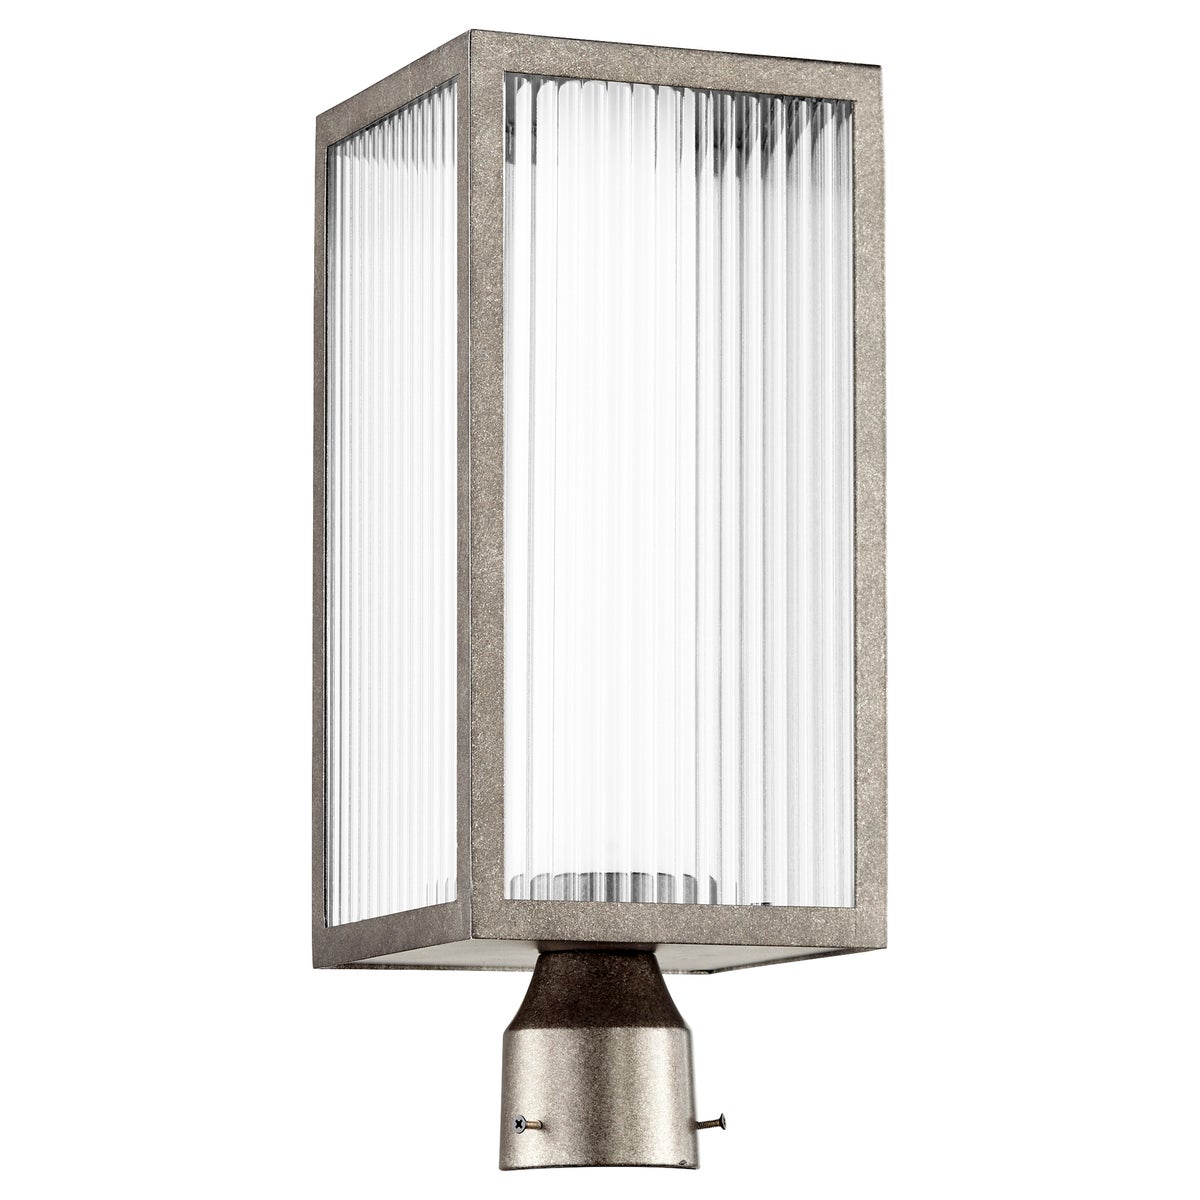 Outdoor Modern Post Light with sleek design, frosted shade inside clear fluted glass exterior. 3 dimmable LED light sources. Update your home&#39;s exterior with functional beauty.